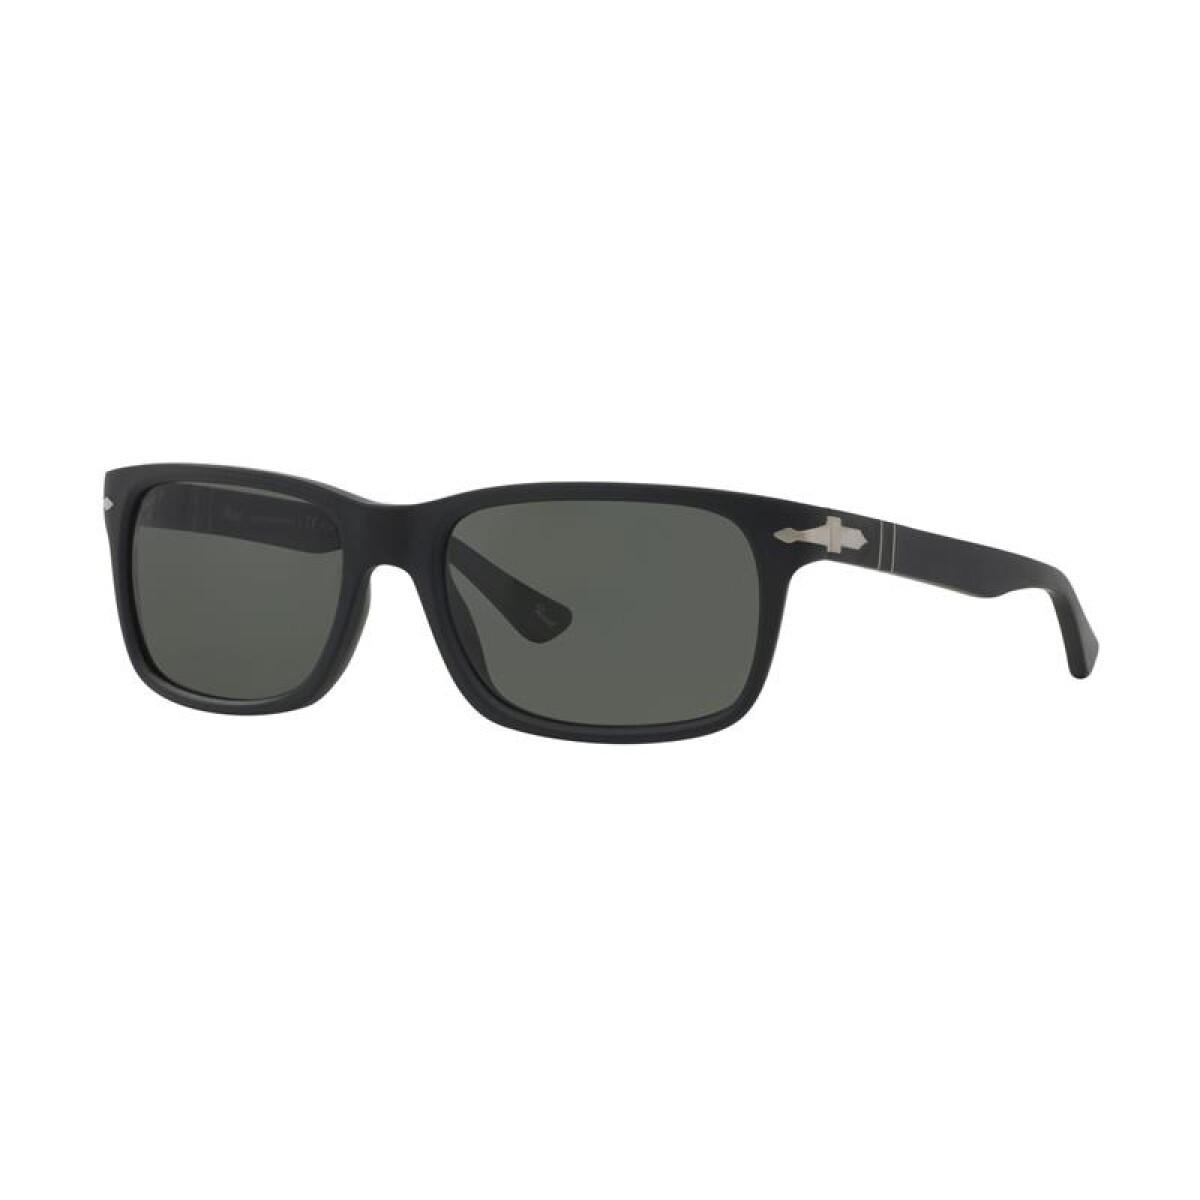 Persol 3048-s - 9000/58 